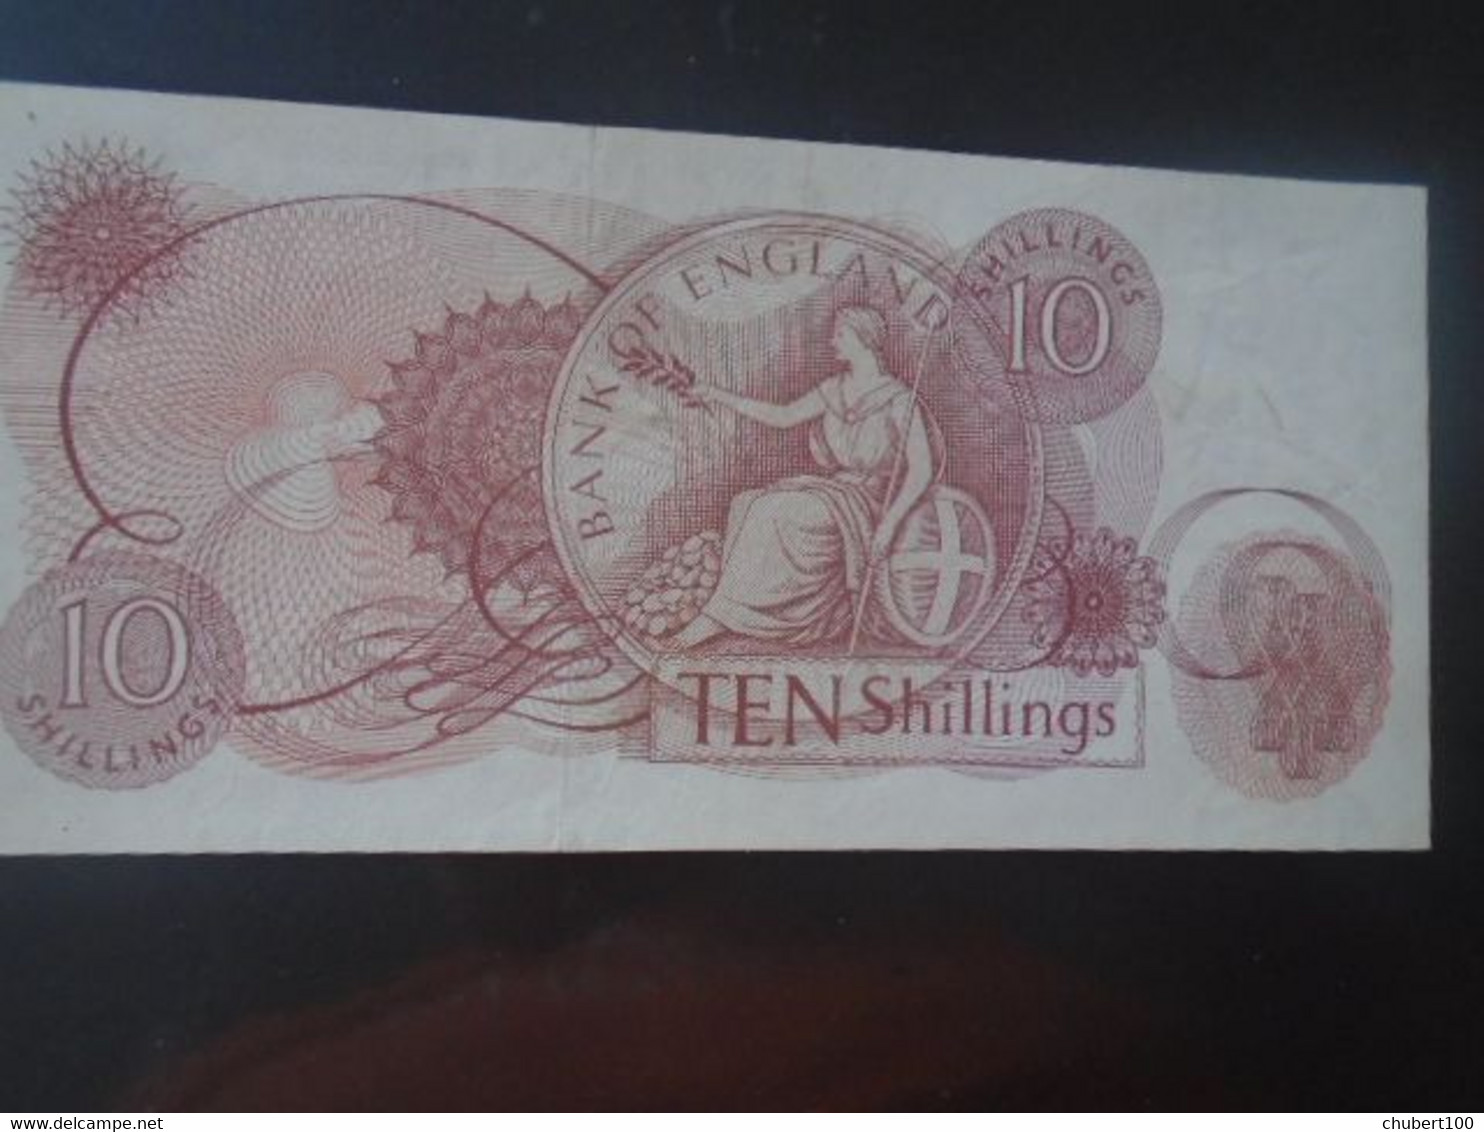 GREAT BRITAIN , P 373b , 10 Shillings , ND 1962, Almost  UNC , Presque  Neuf - 10 Shillings